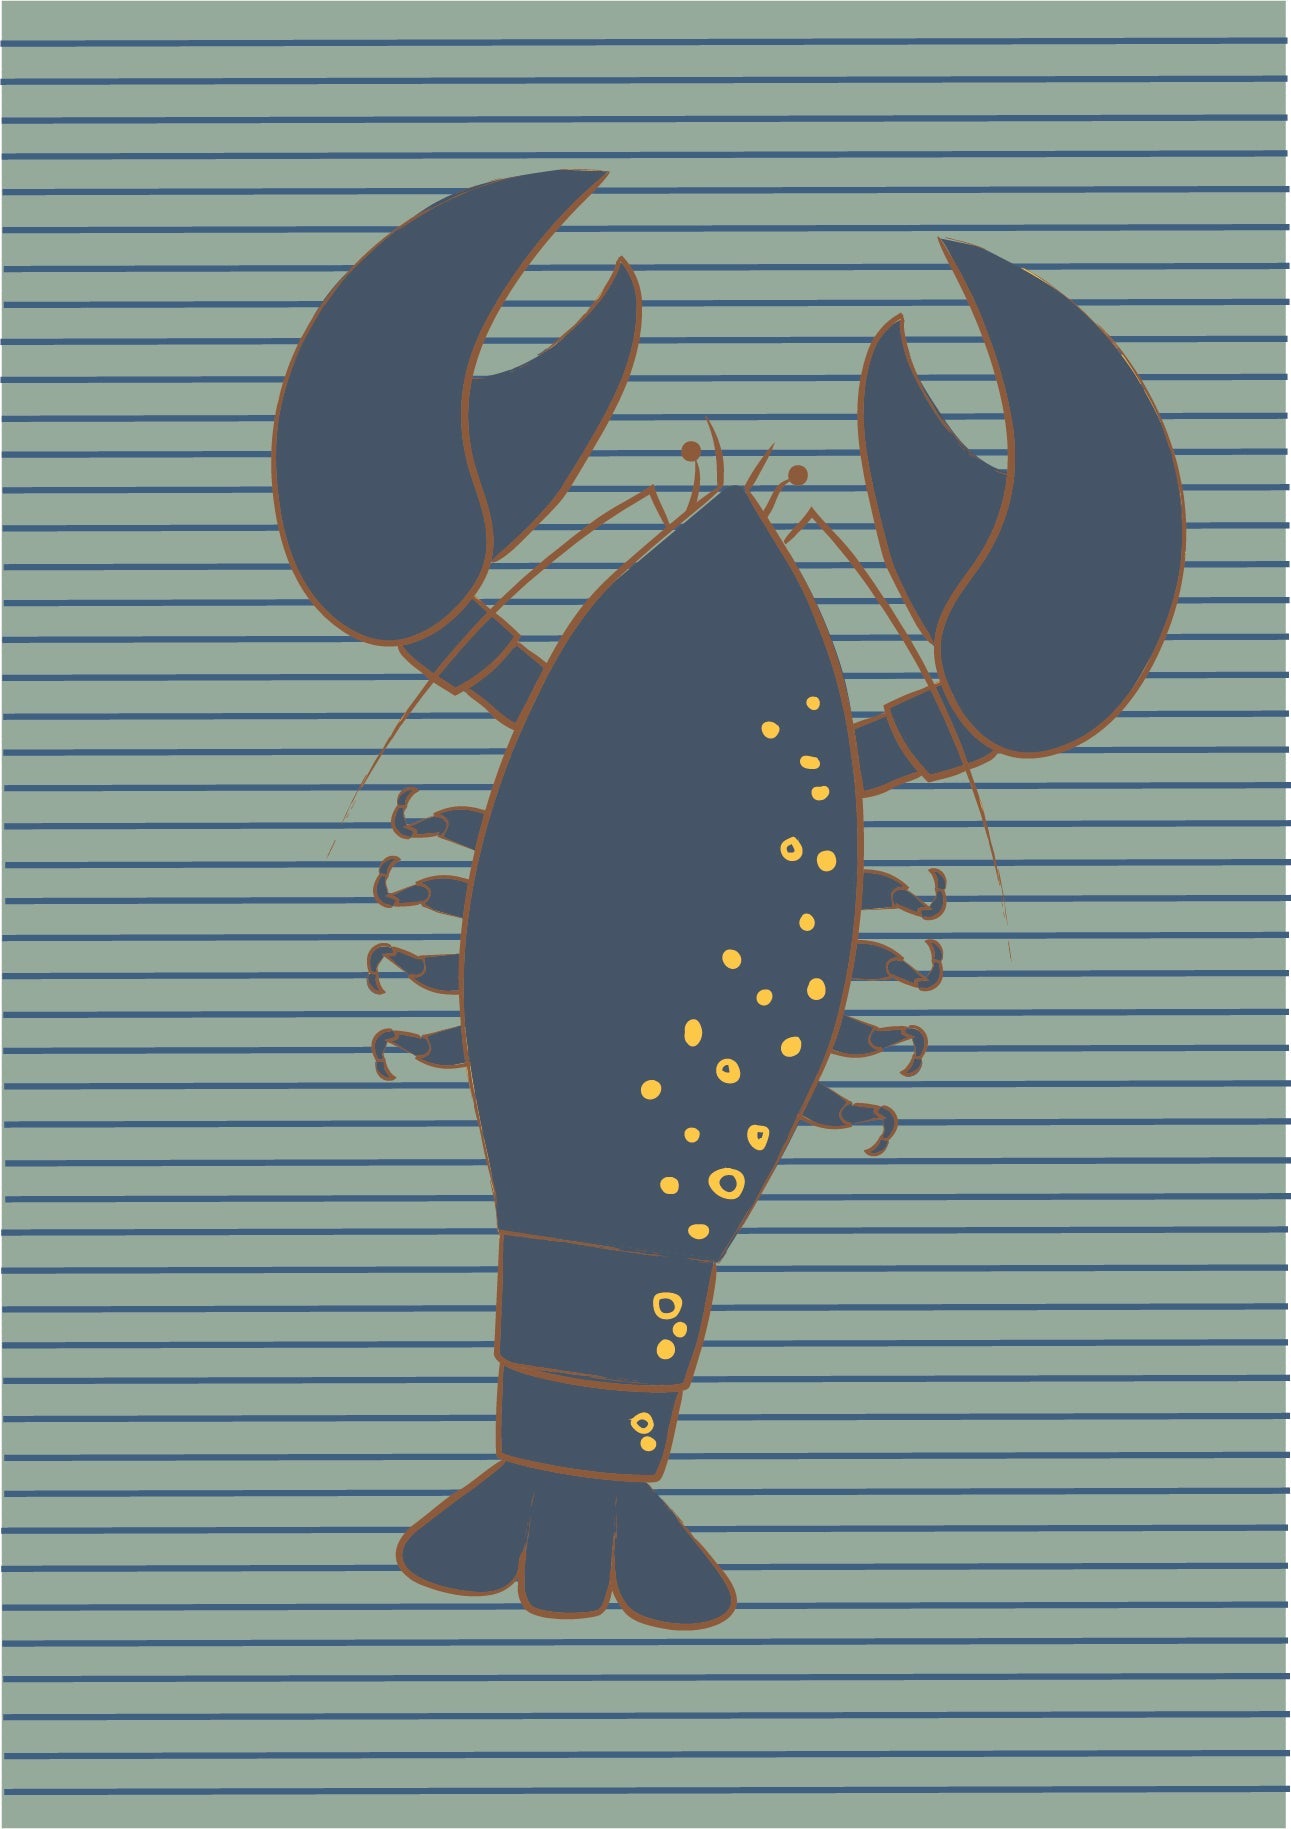 Blue Lobster on lighter blue background with horizontal lines